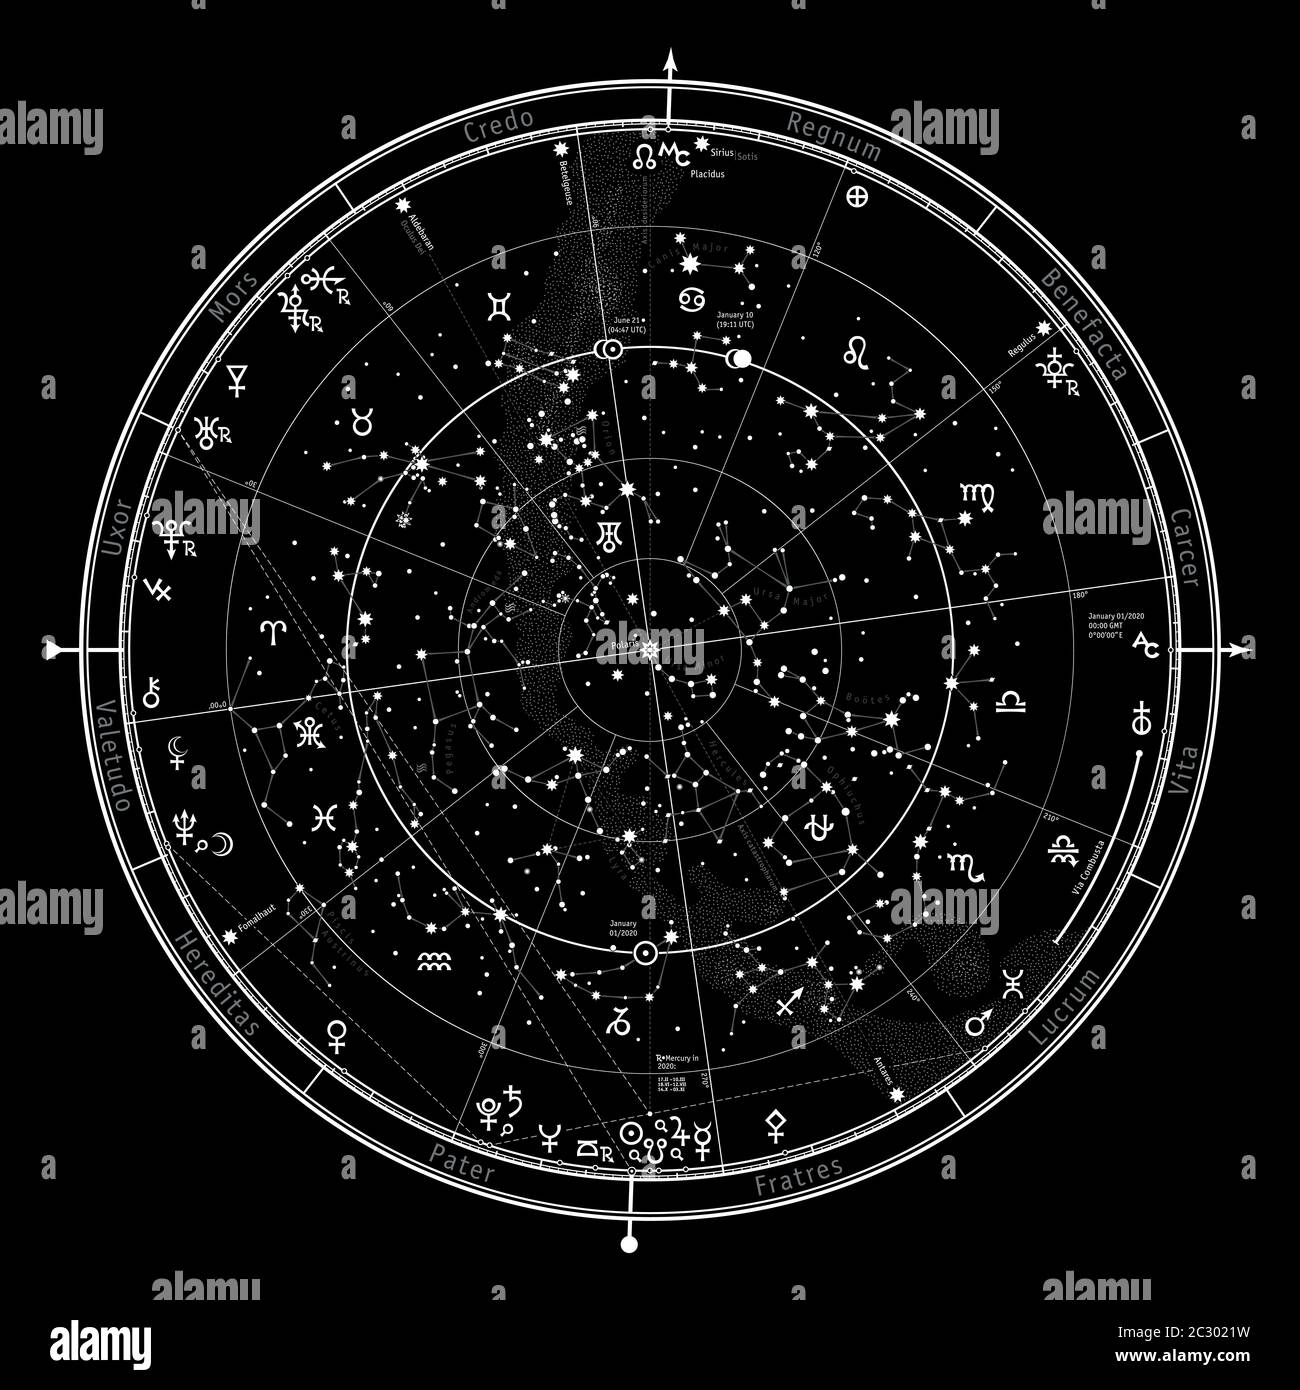 Astrological Celestial Map of The Northern Hemisphere. The General Global Universal Horoscope '2020. Stock Photo